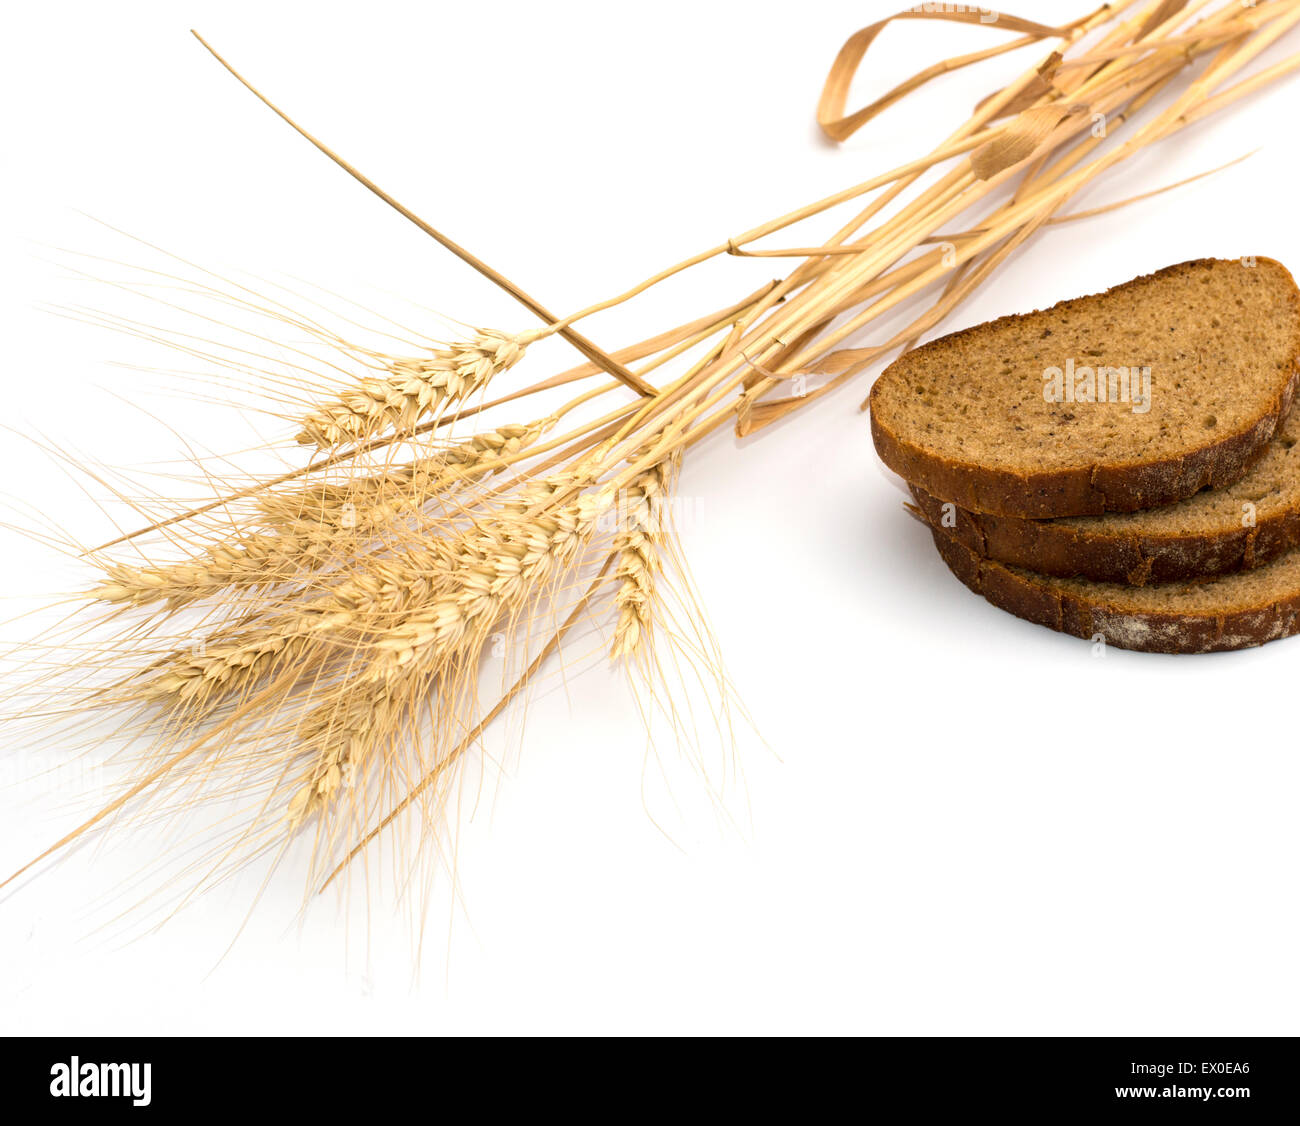 the cut bread and ears of wheat Stock Photo